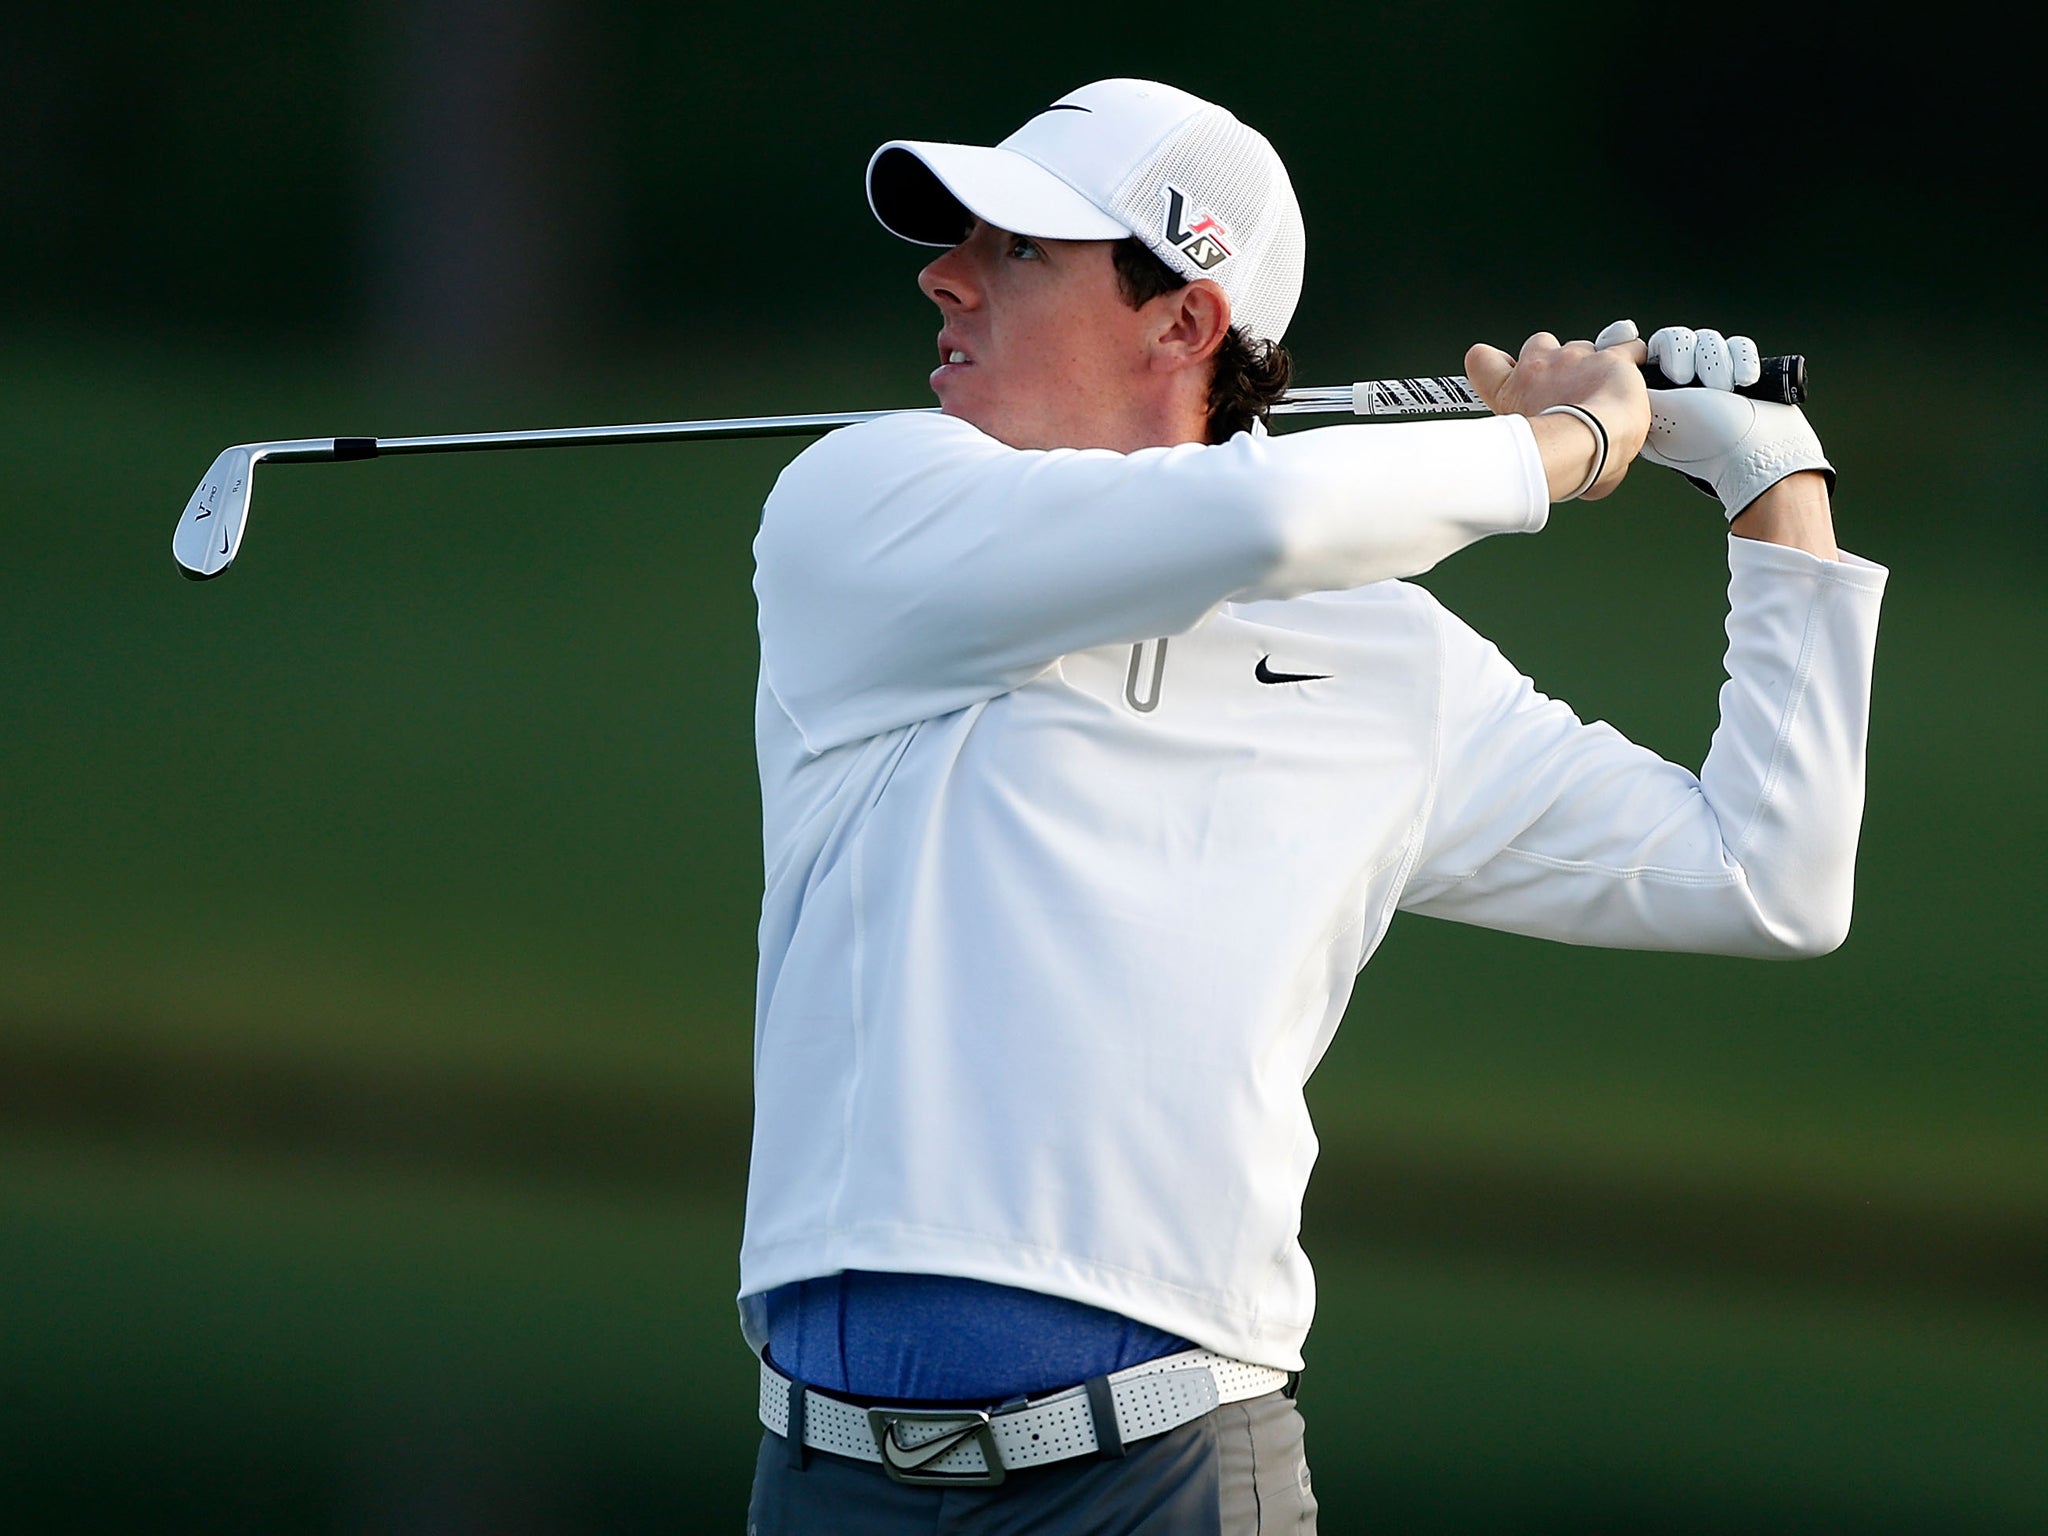 Rory McIlroy’s second round in Houston was more consistent